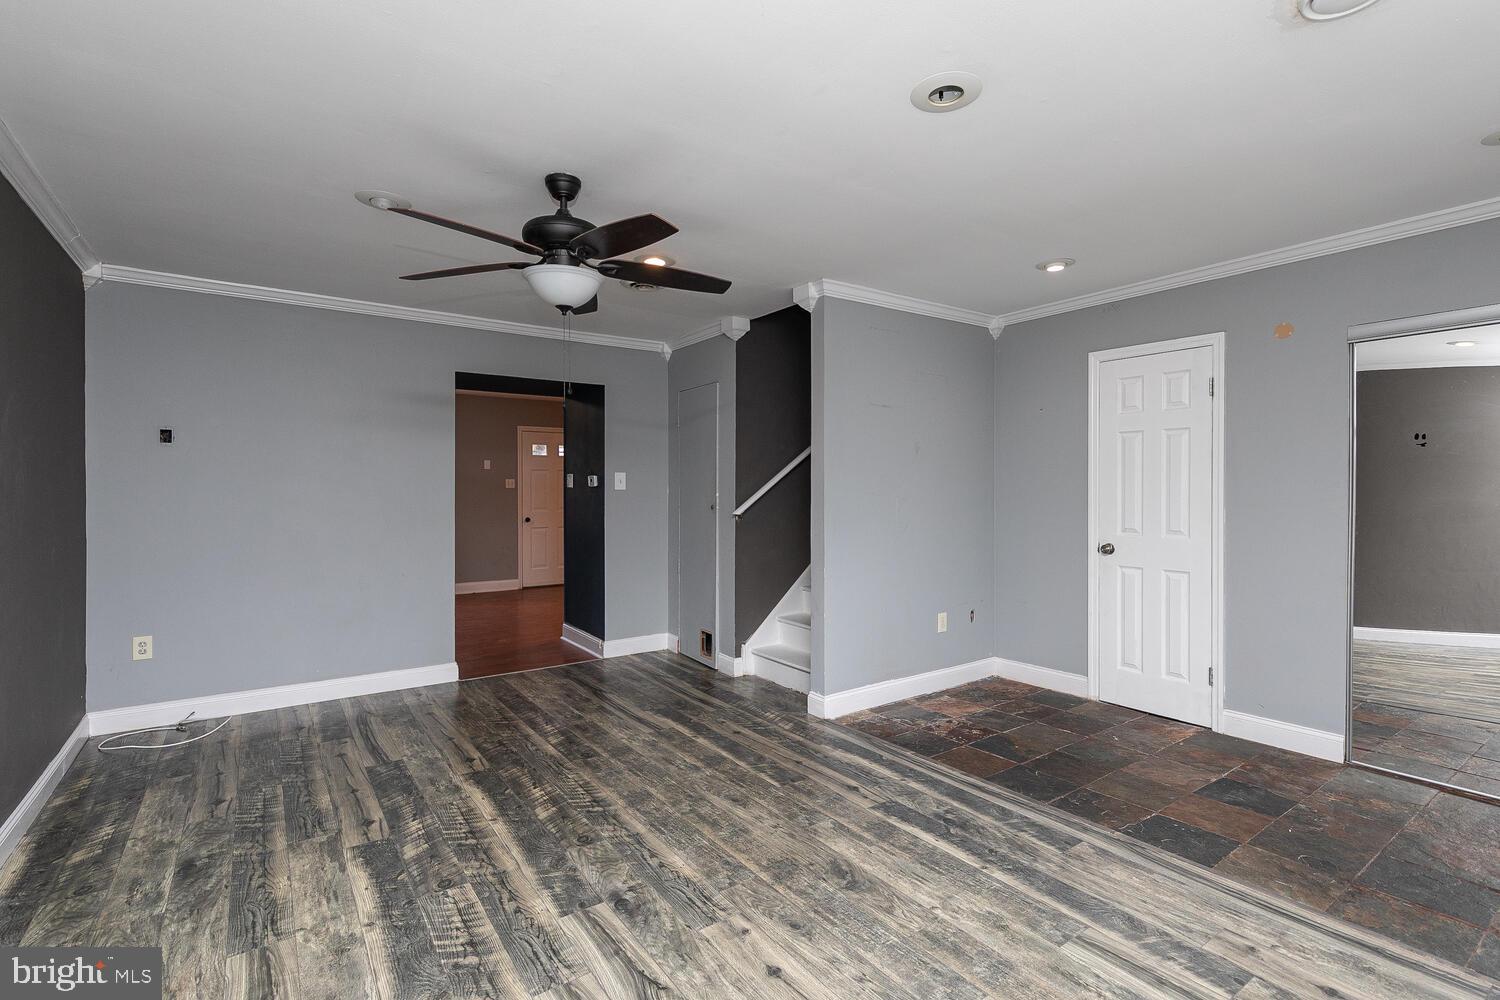 a view of empty room with wooden floor and ceiling fan